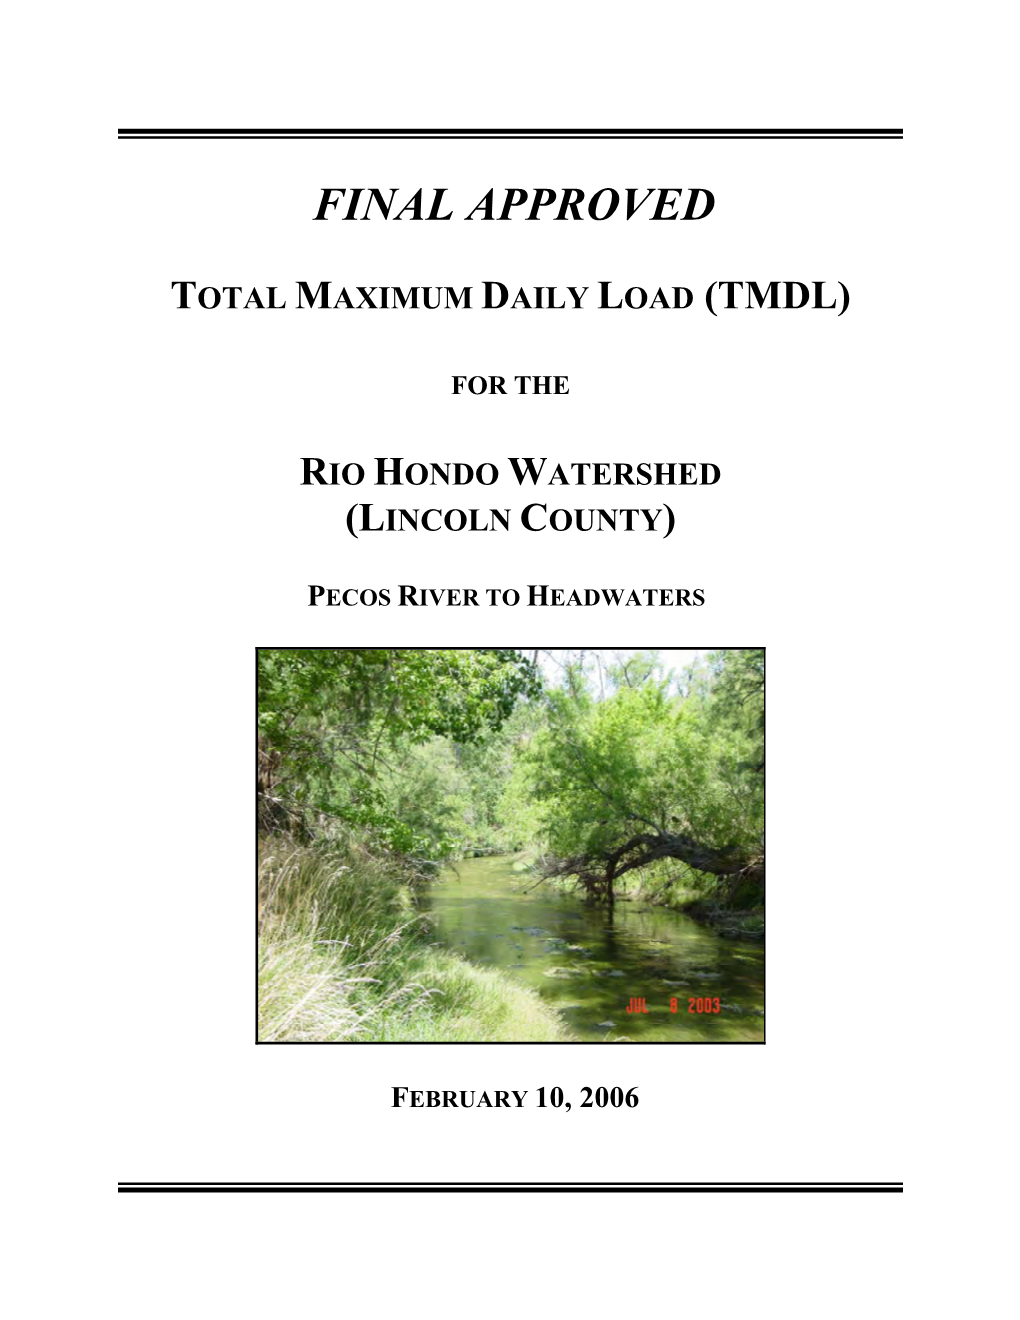 FINAL APPROVED Total Maximum Daily Load (TMDL) for the Rio Hondo Watershed (Lincoln County)